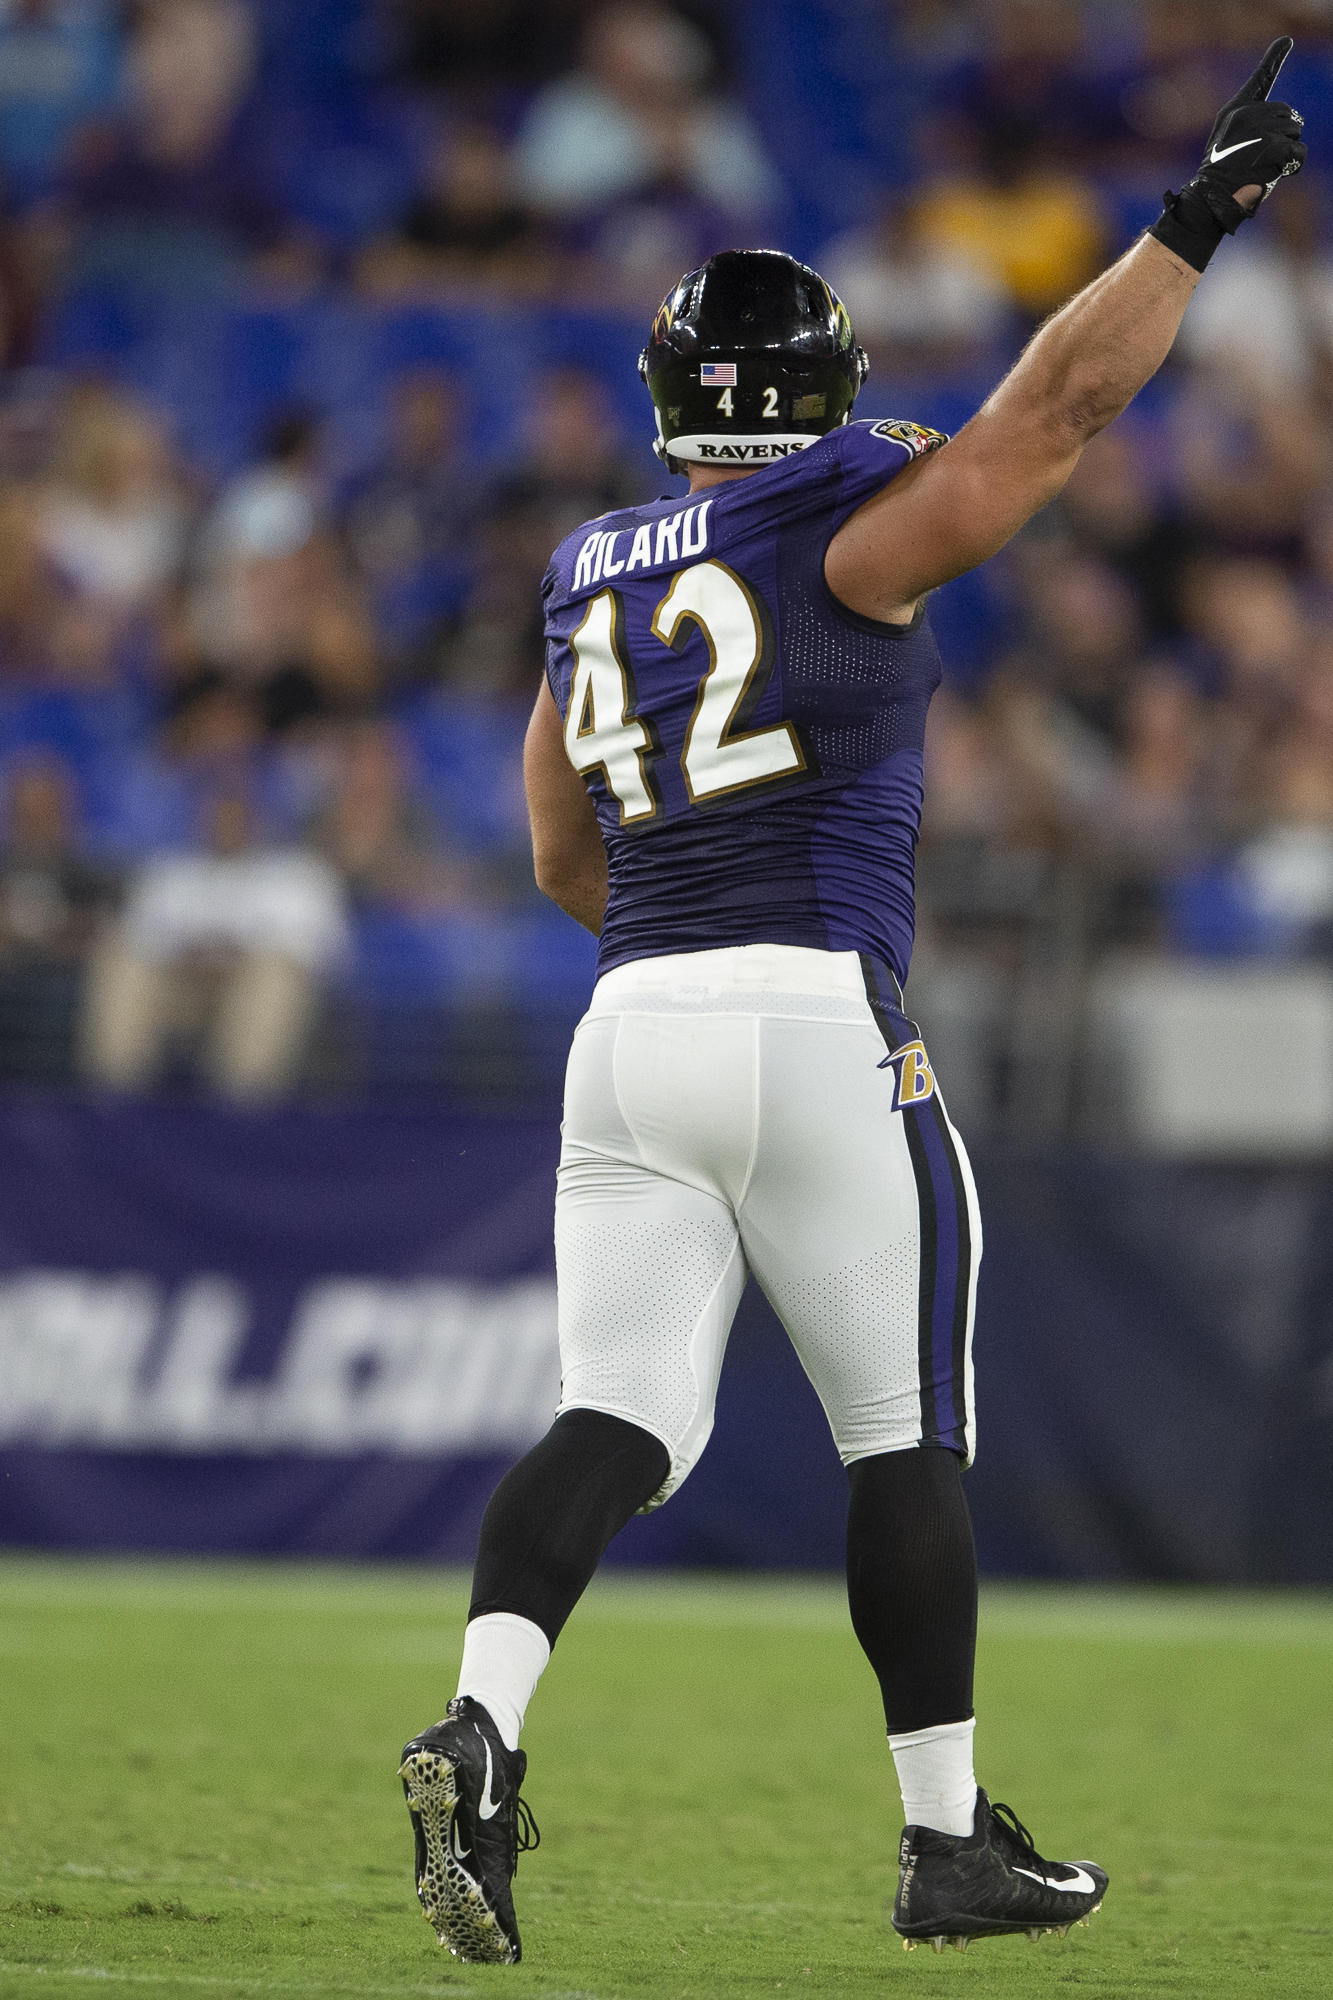 Pat Ricard On Pro Bowl, Playing Both Ways and the Special Ravens Team